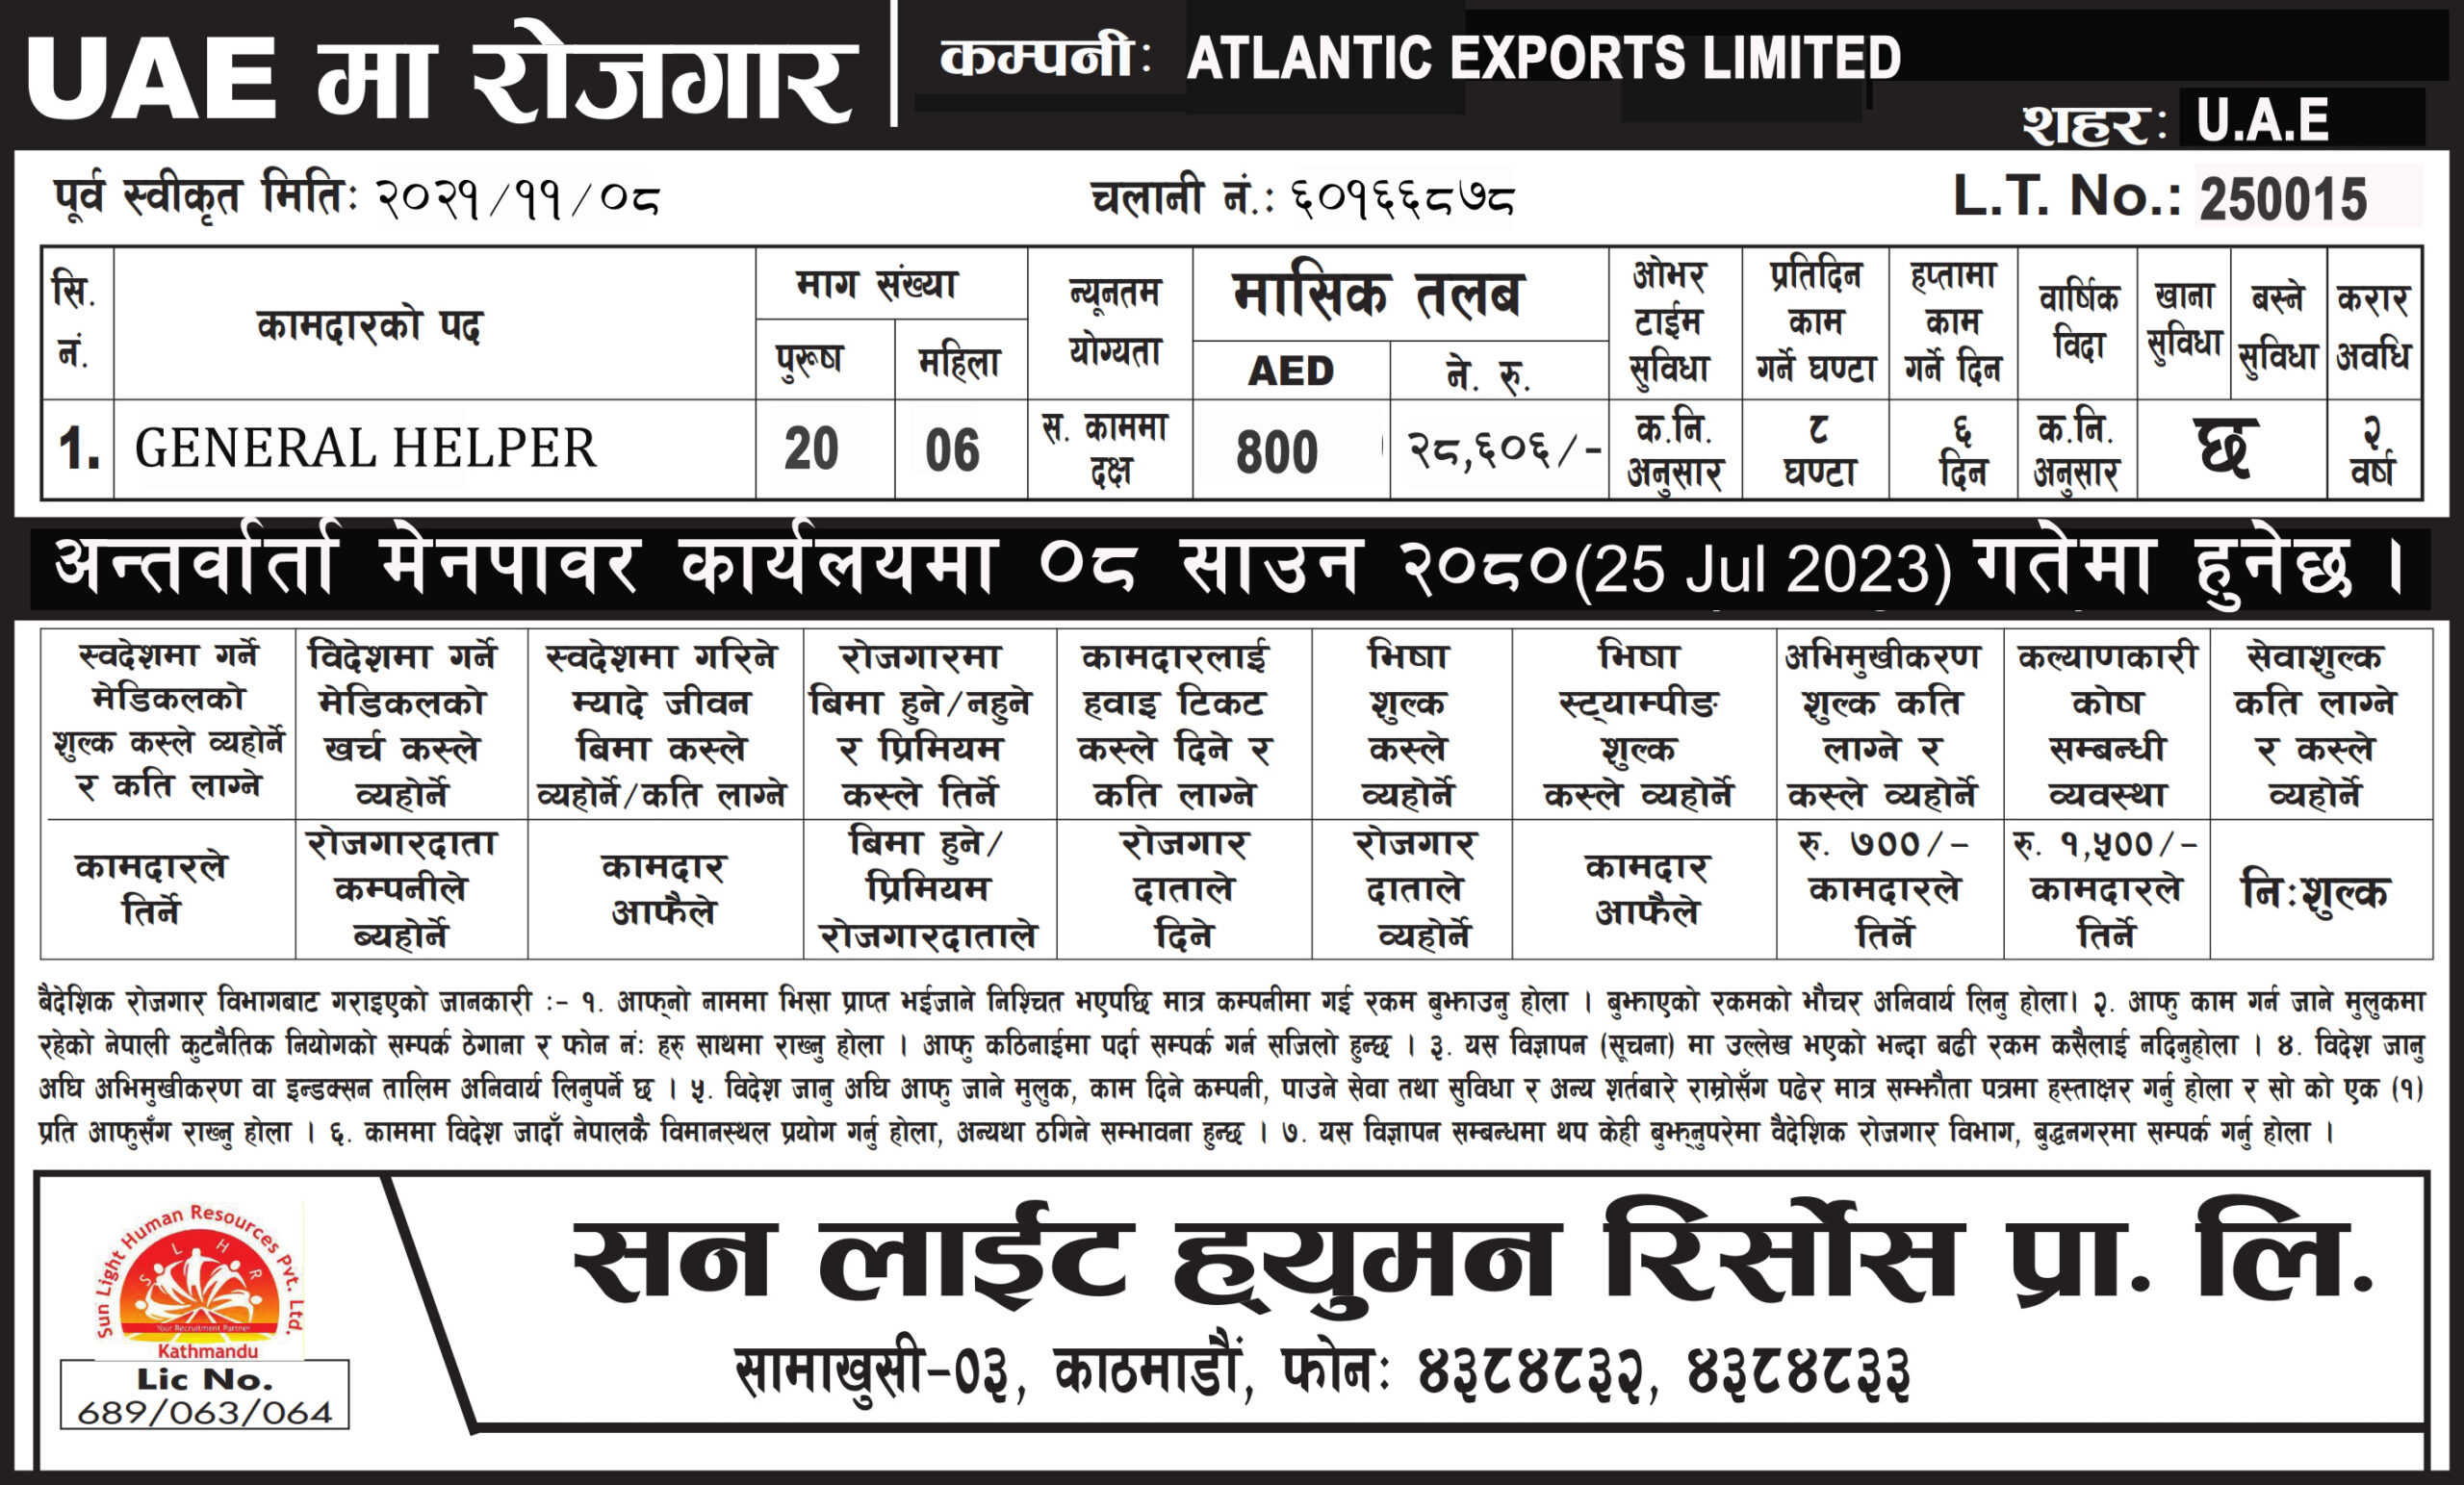 ATLANTIC EXPORTS LIMITED